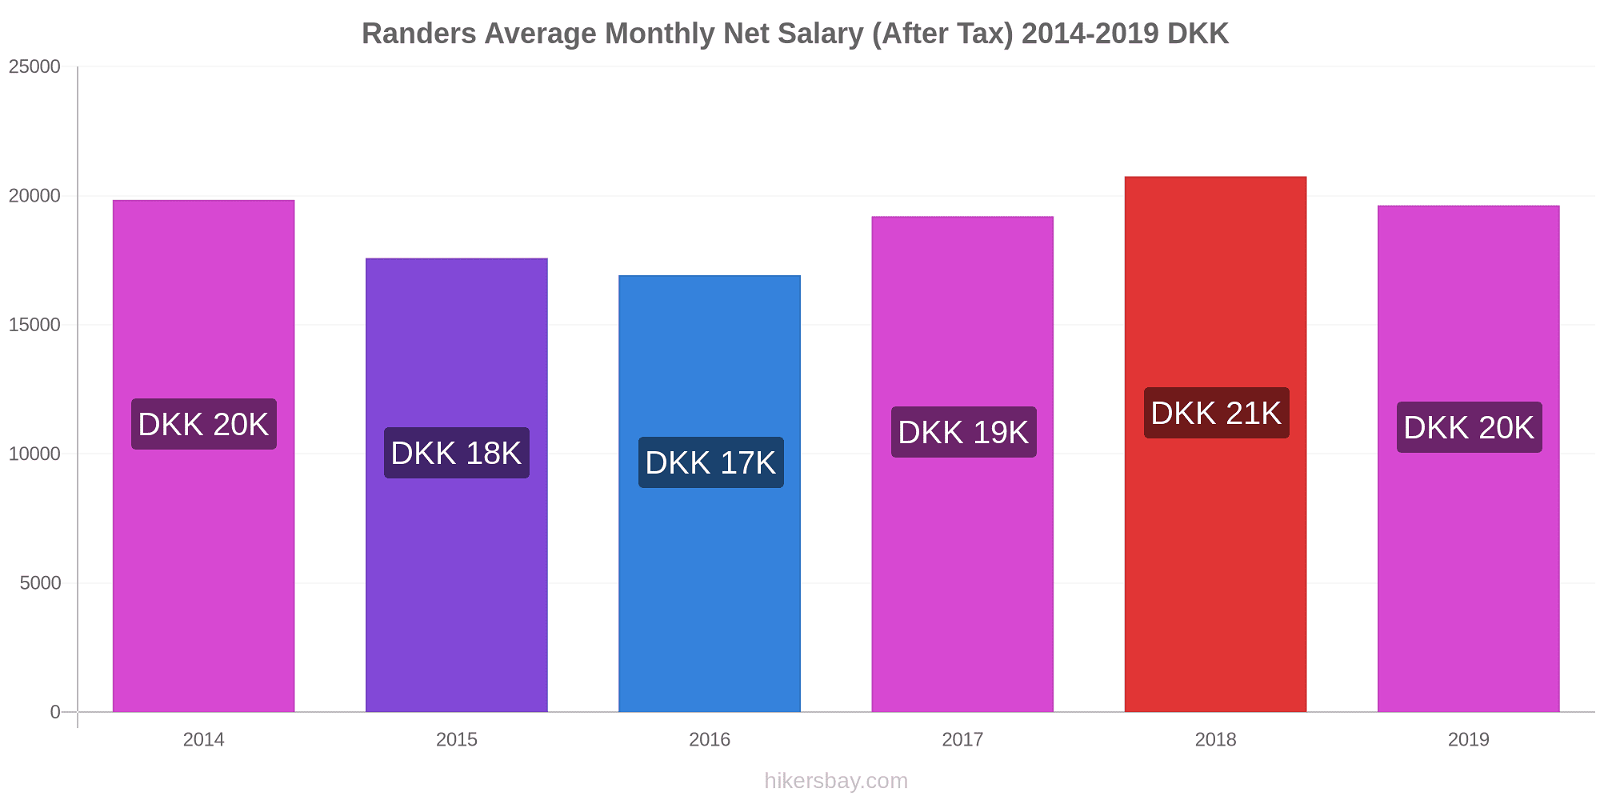 Randers price changes Average Monthly Net Salary (After Tax) hikersbay.com